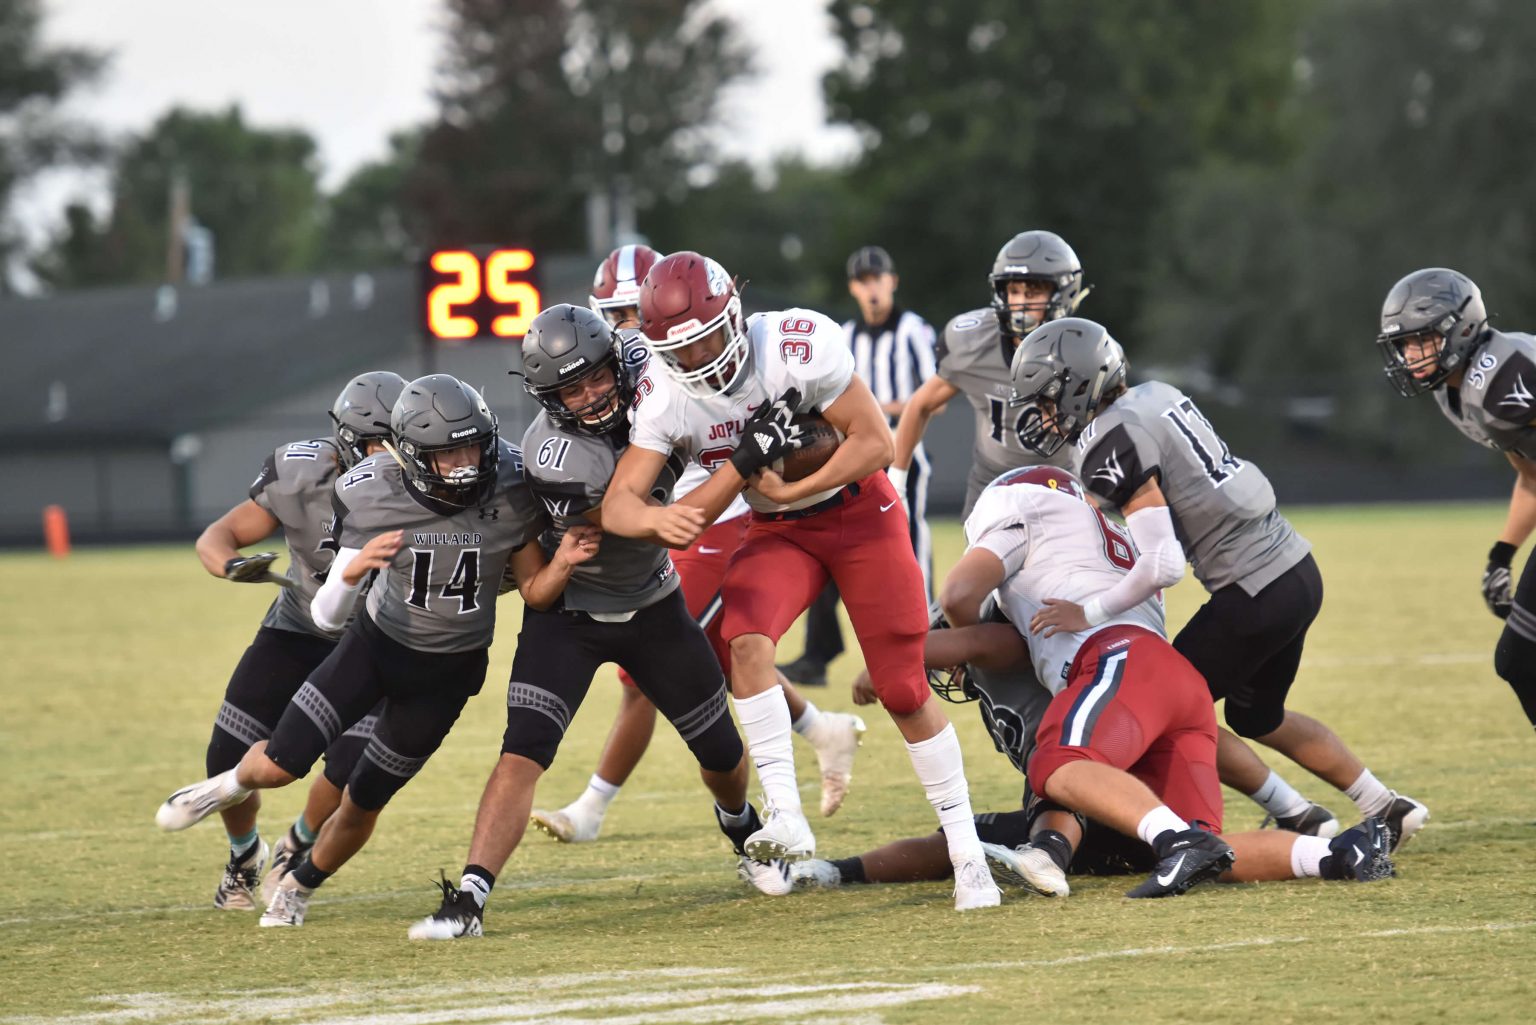 FOOTBALL: Willard earns first win of the season with 32-20 victory over